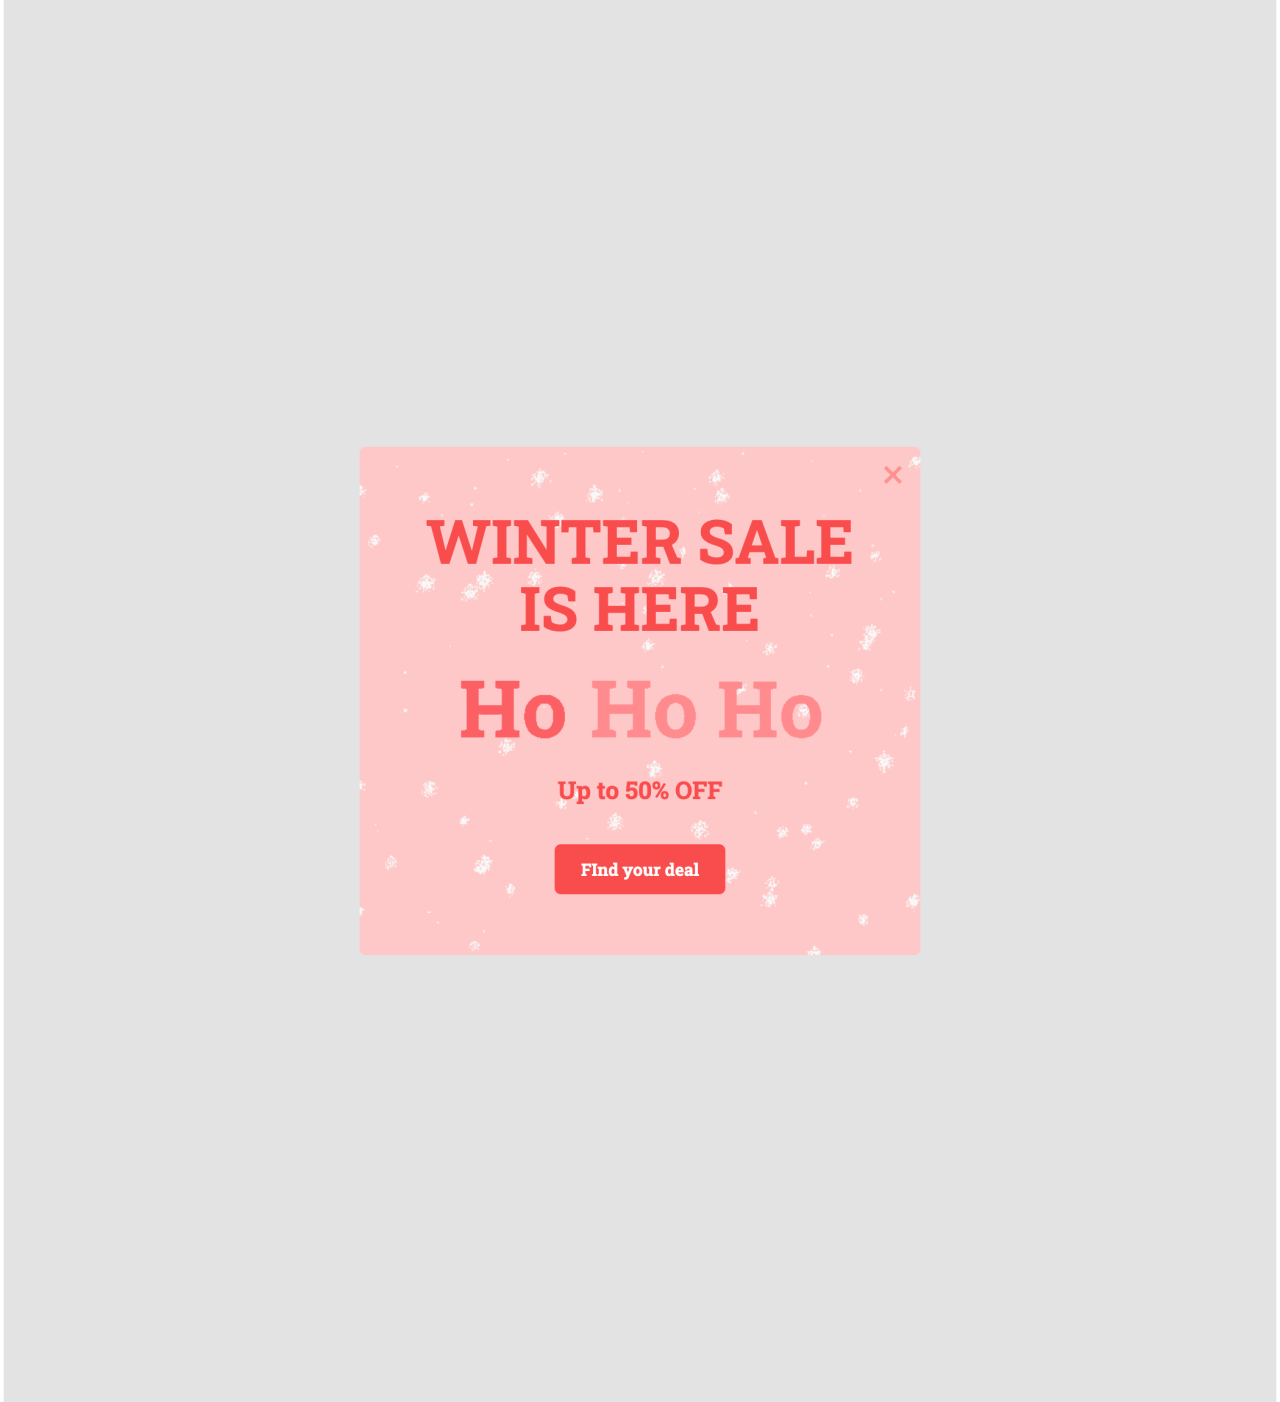 Winter promo sale template - Made by MailerLite